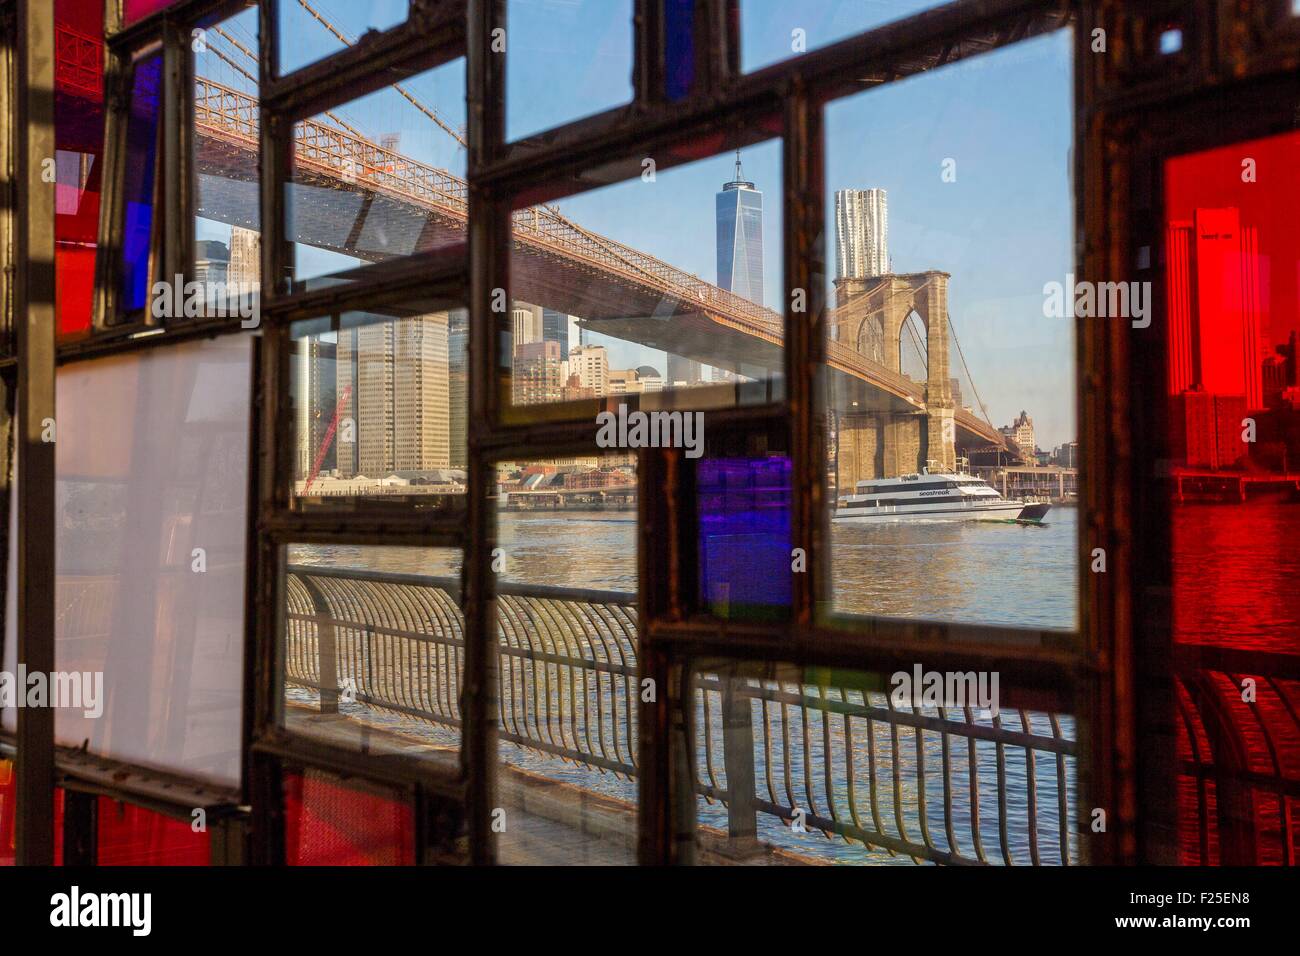 United States, New York, Brooklyn Dumbo neighborhood (District Under the Manhattan Bridge Overpass), view of the East River, Manhattan and the Brooklyn Bridge through the windows of a work of art Stock Photo